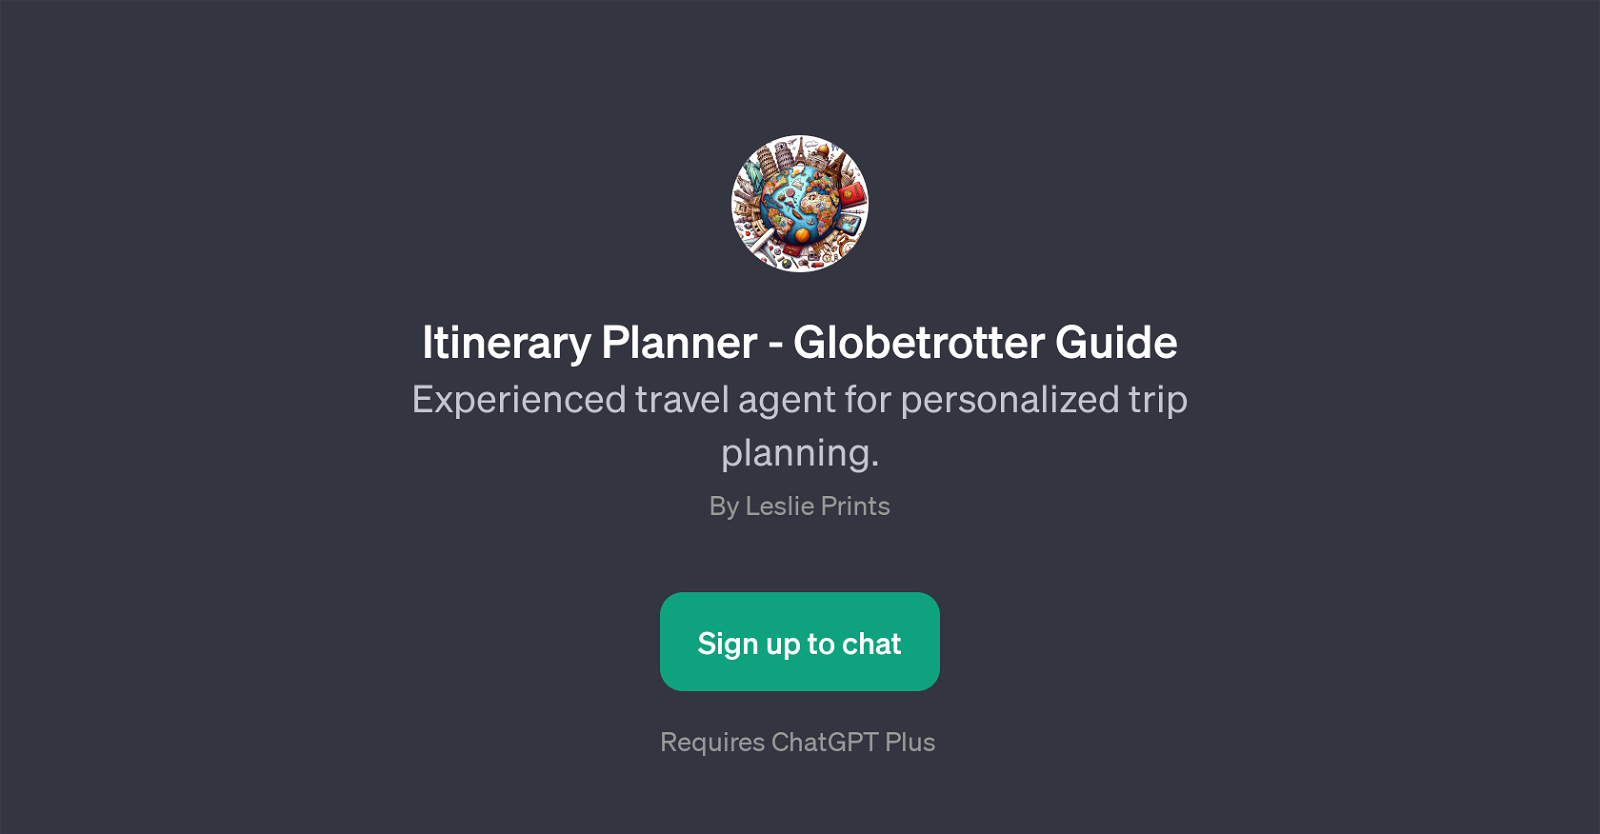 Itinerary Planner - Globetrotter Guide website